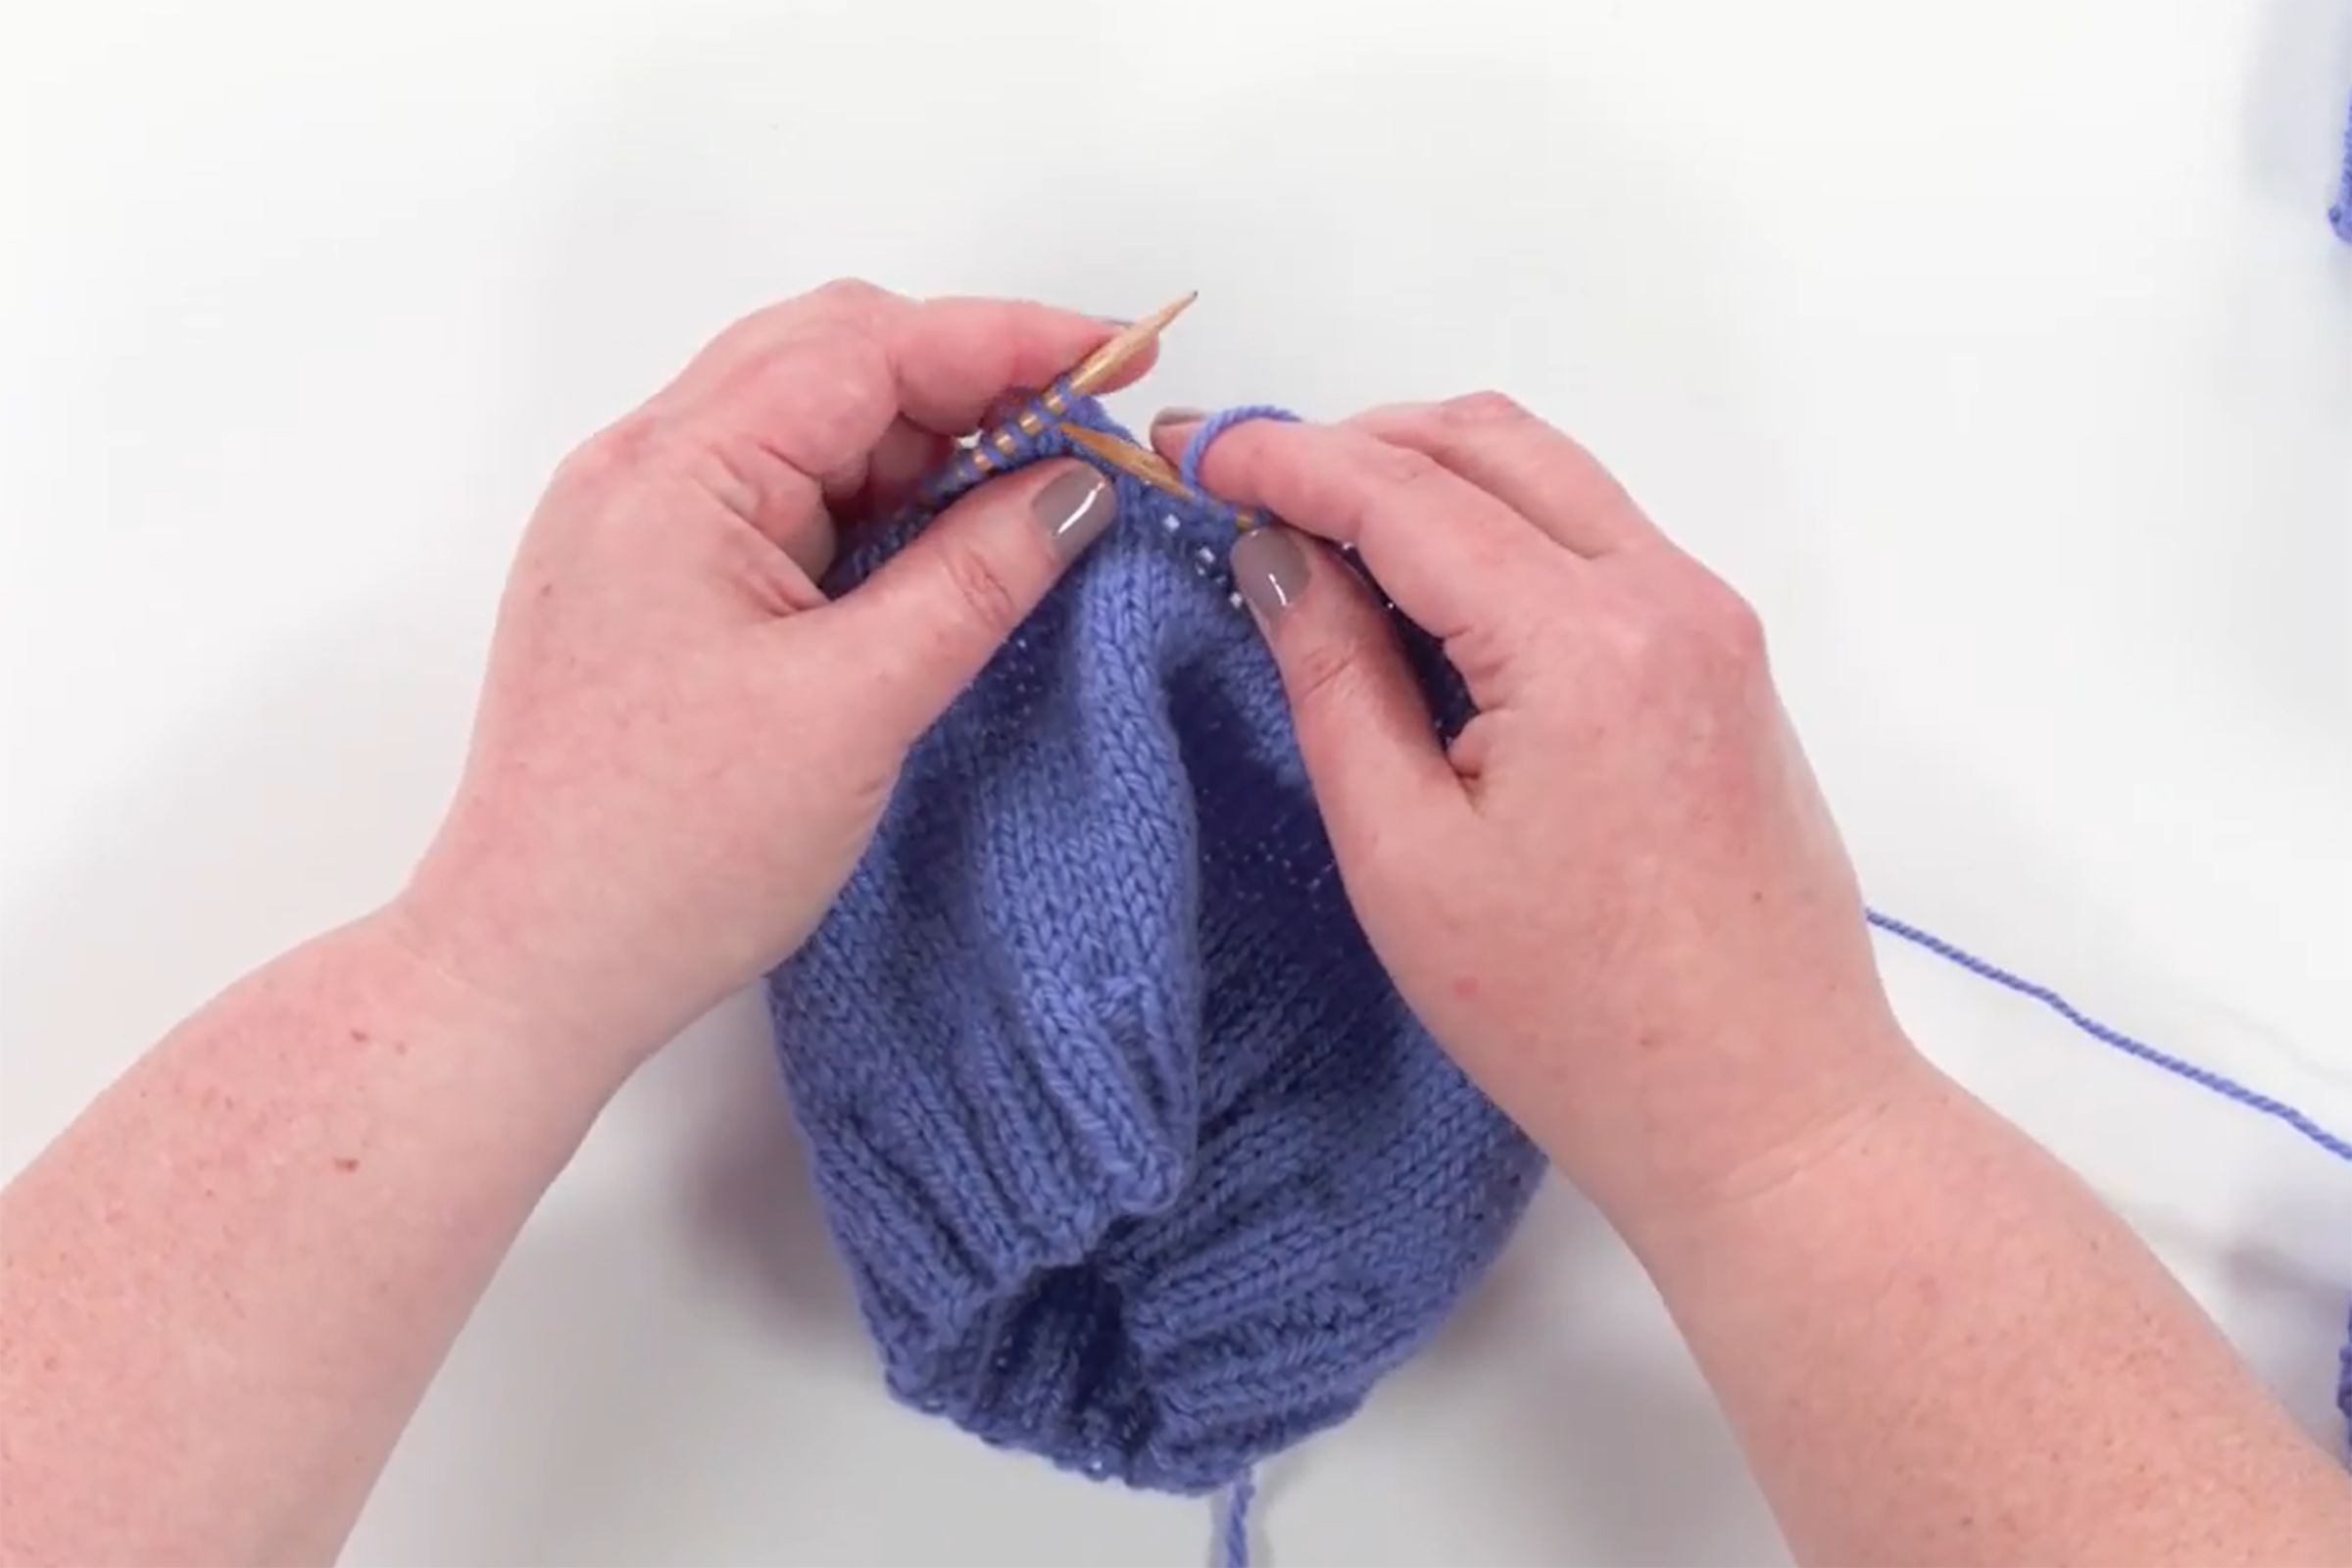 Decreases & Changing to Double-Pointed Needles